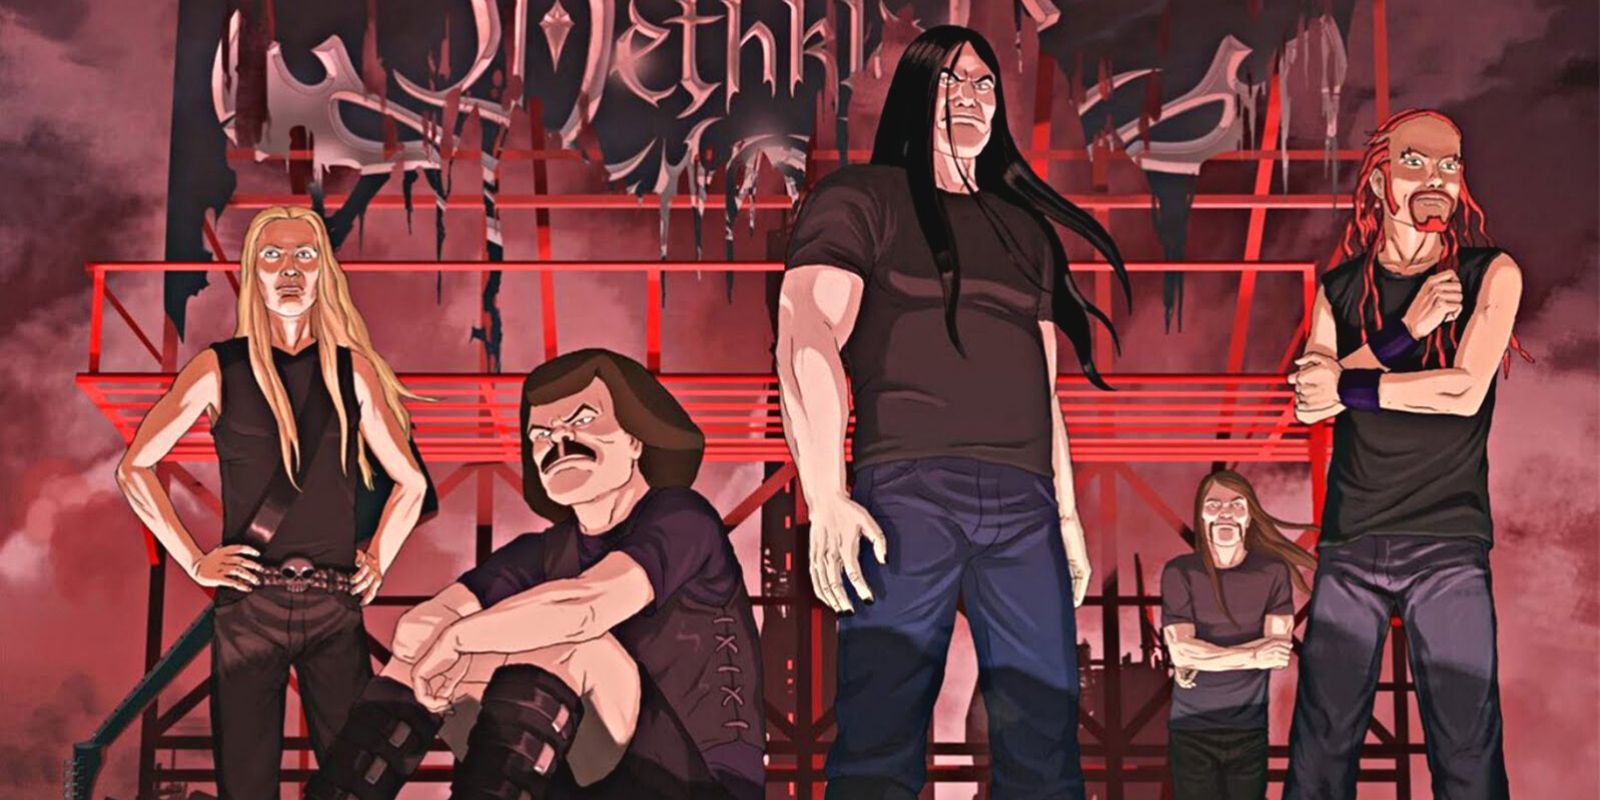 The cast of Metalocalypse posing in front of a billboard with the band's logo